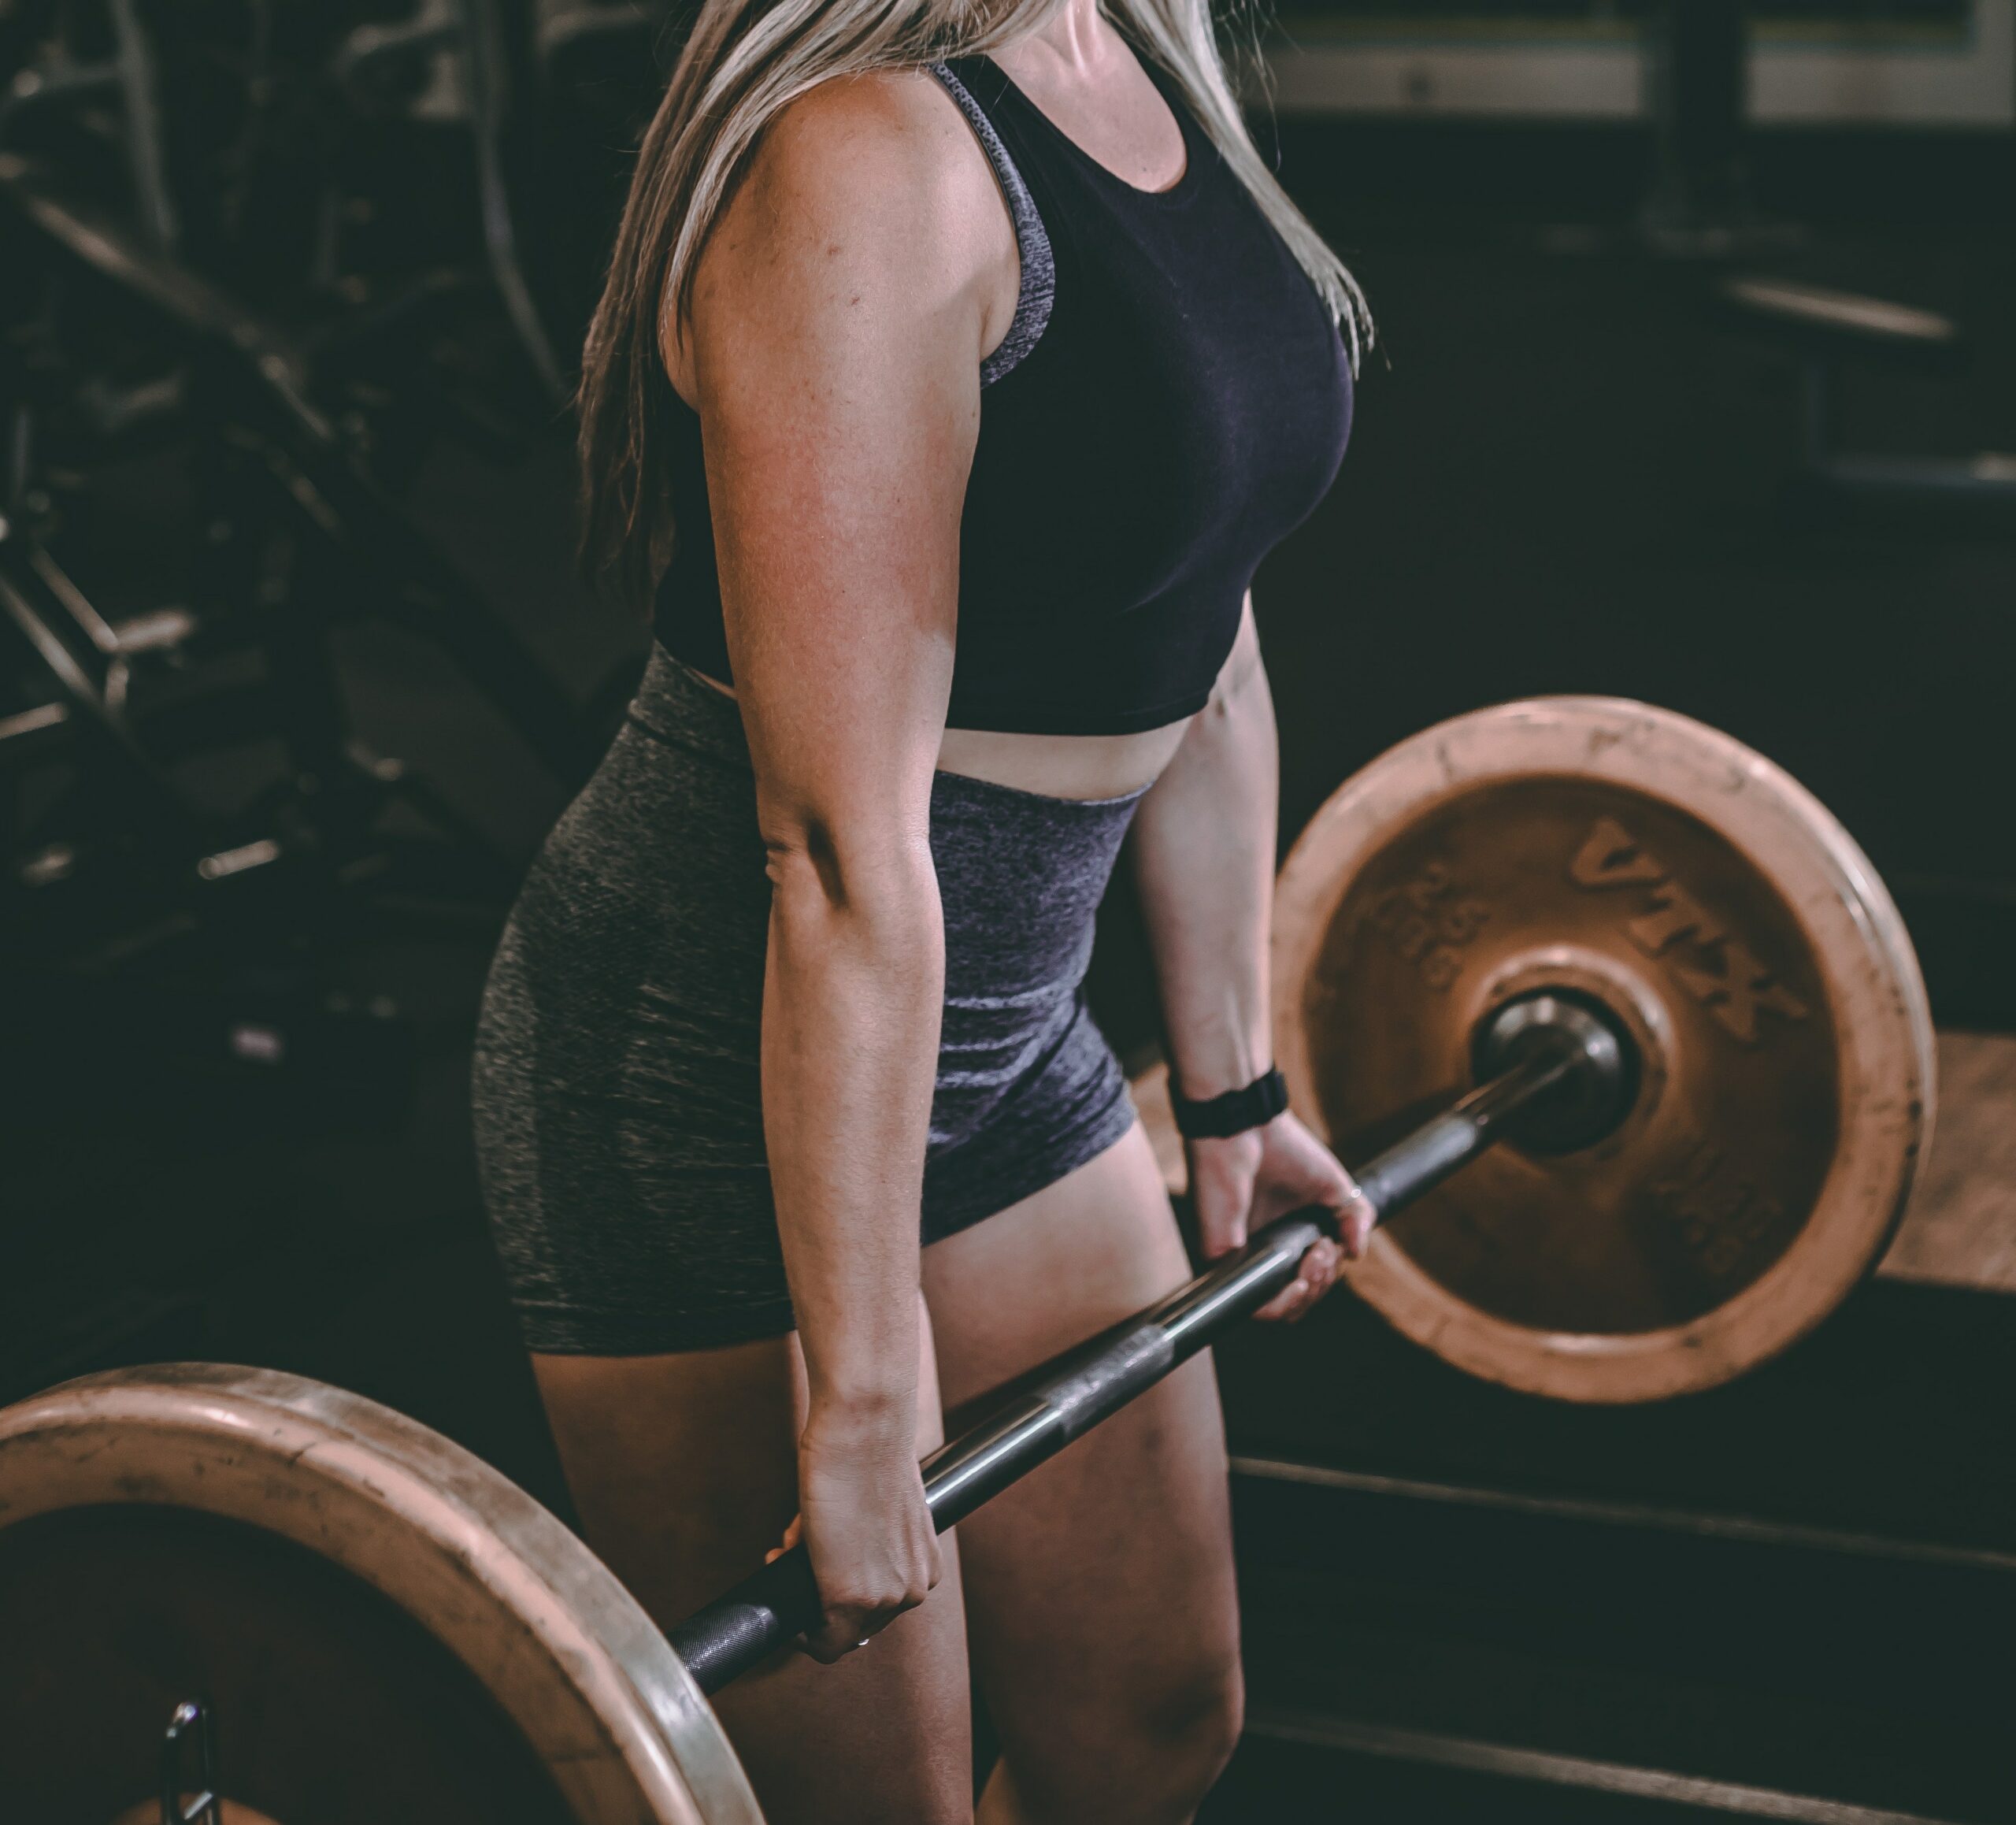 To deadlift or not to deadlift? by Dr. Hailey Jackson